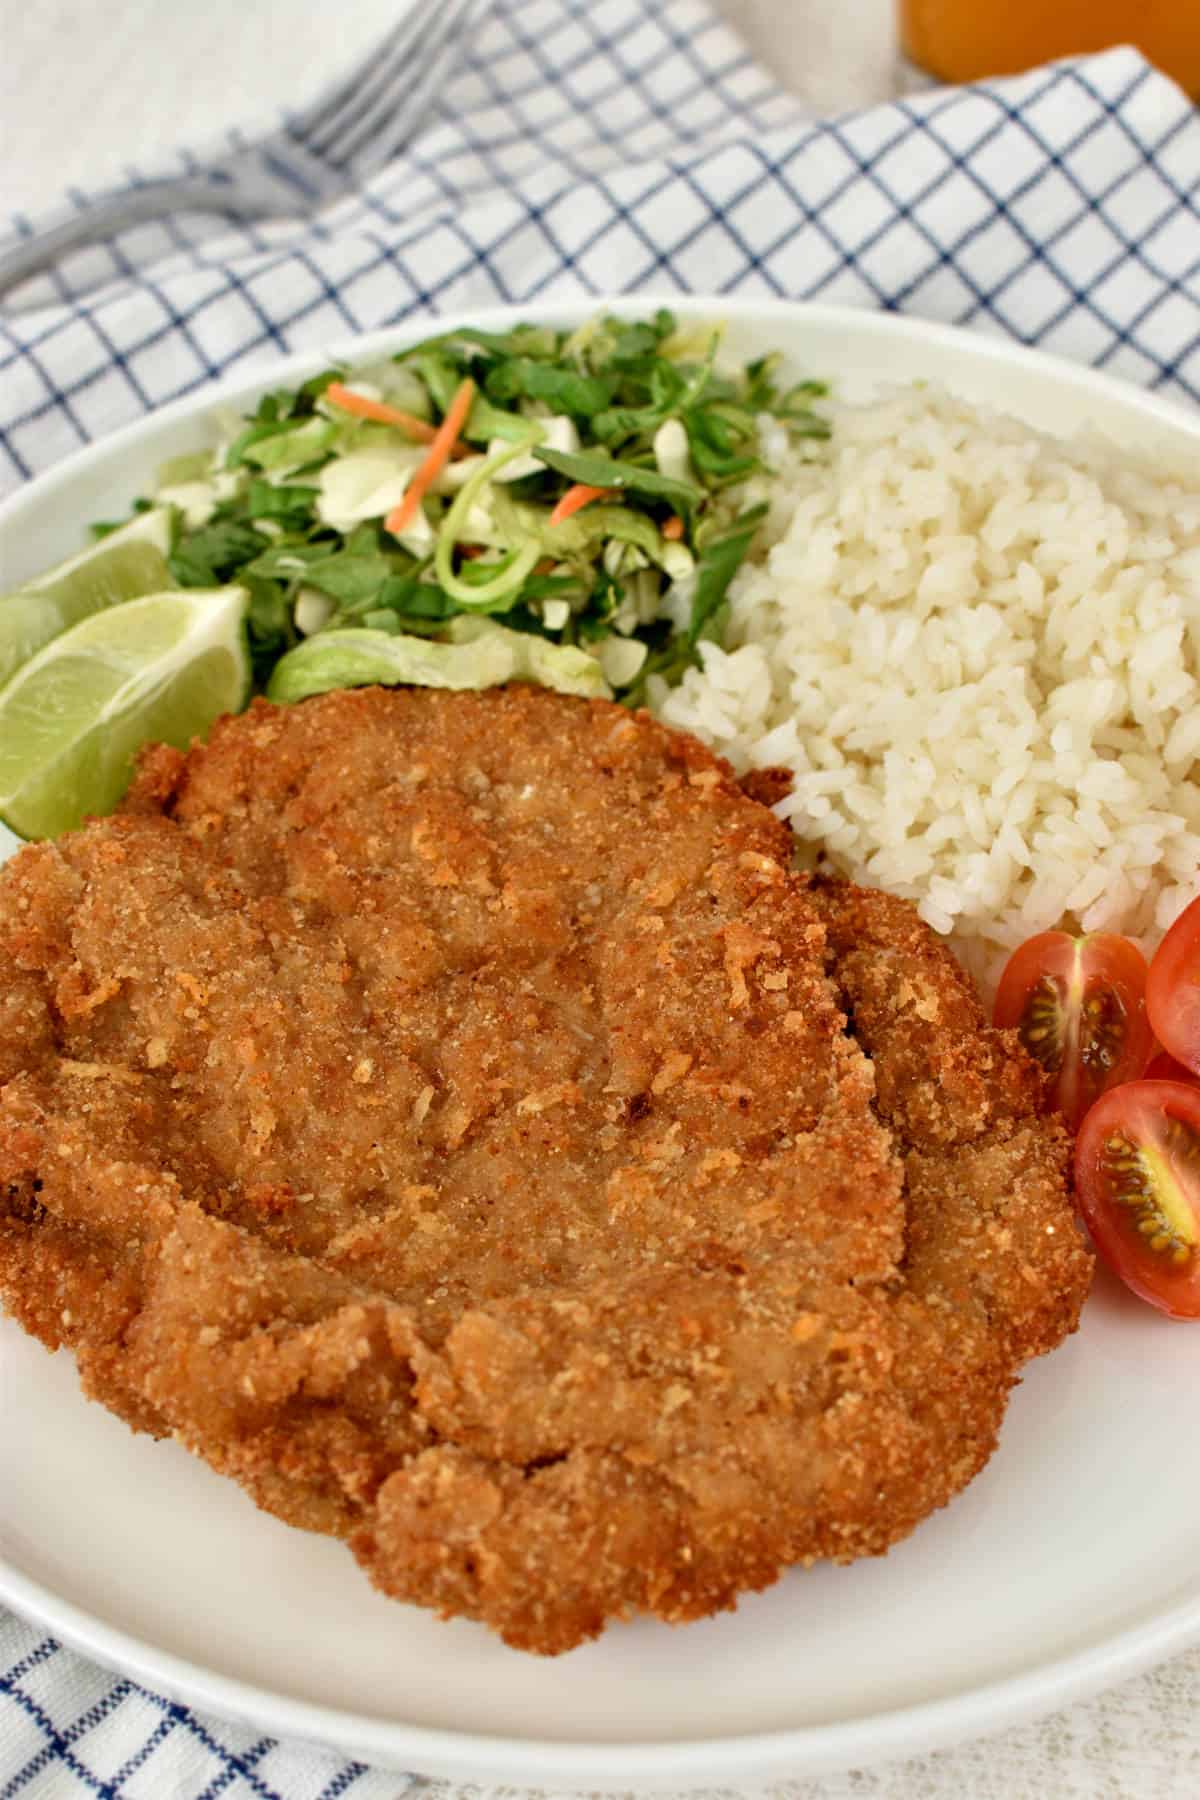 Milanesa steak in a plate with rice, tomatoes, salad, and lime wedges.